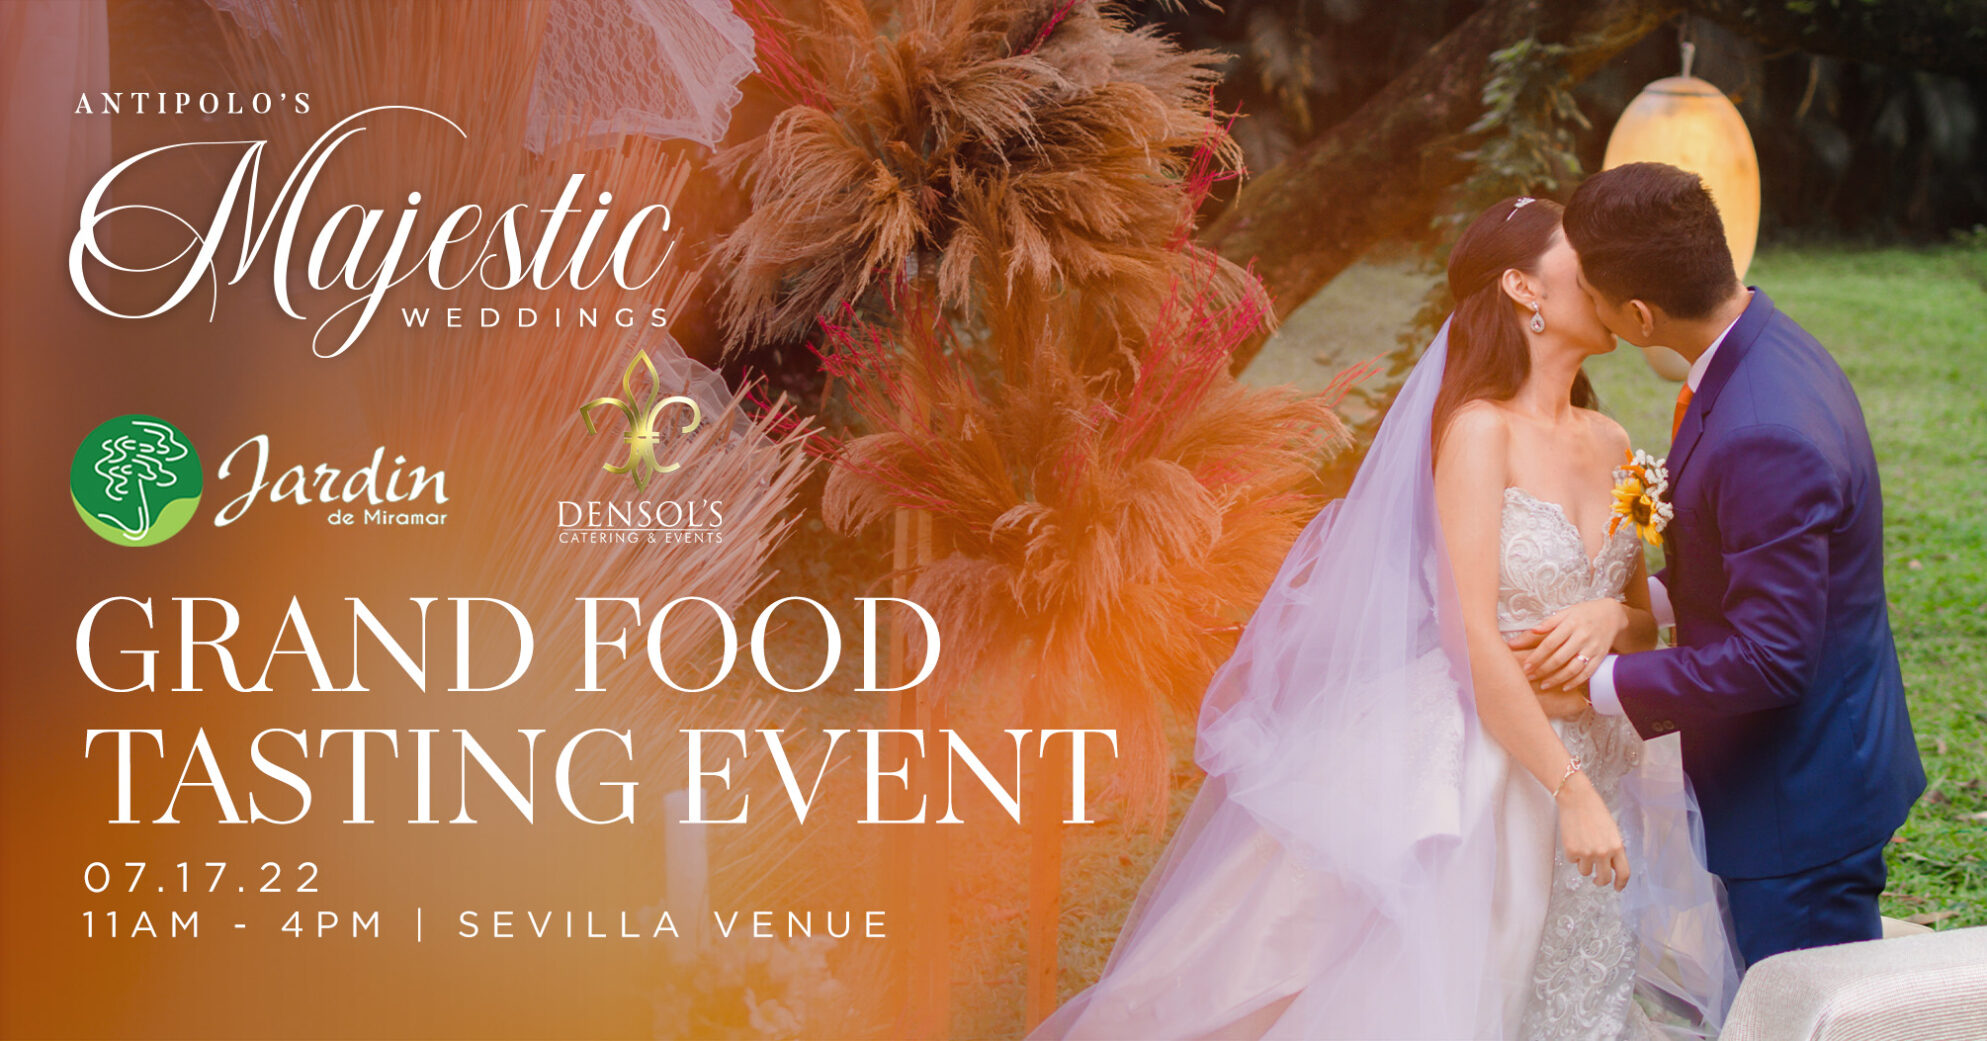 Densol's Catering's Grand Food Tasting Event